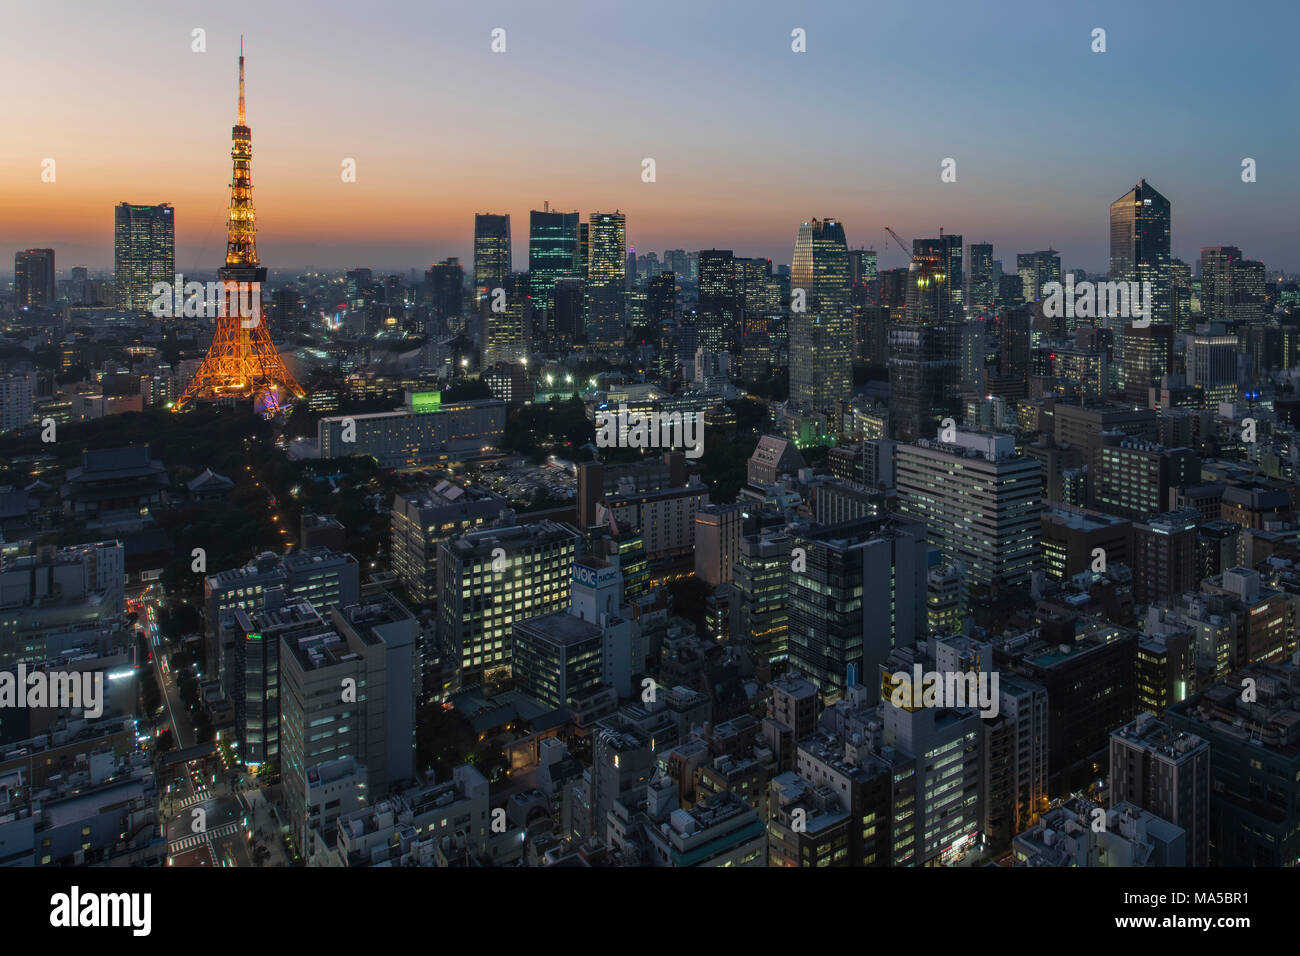 Asia, Japan, Nihon, Nippon, Tokyo, city overview, Hamamatsucho stadium, view from Tokyo World Trade Center Stock Photo